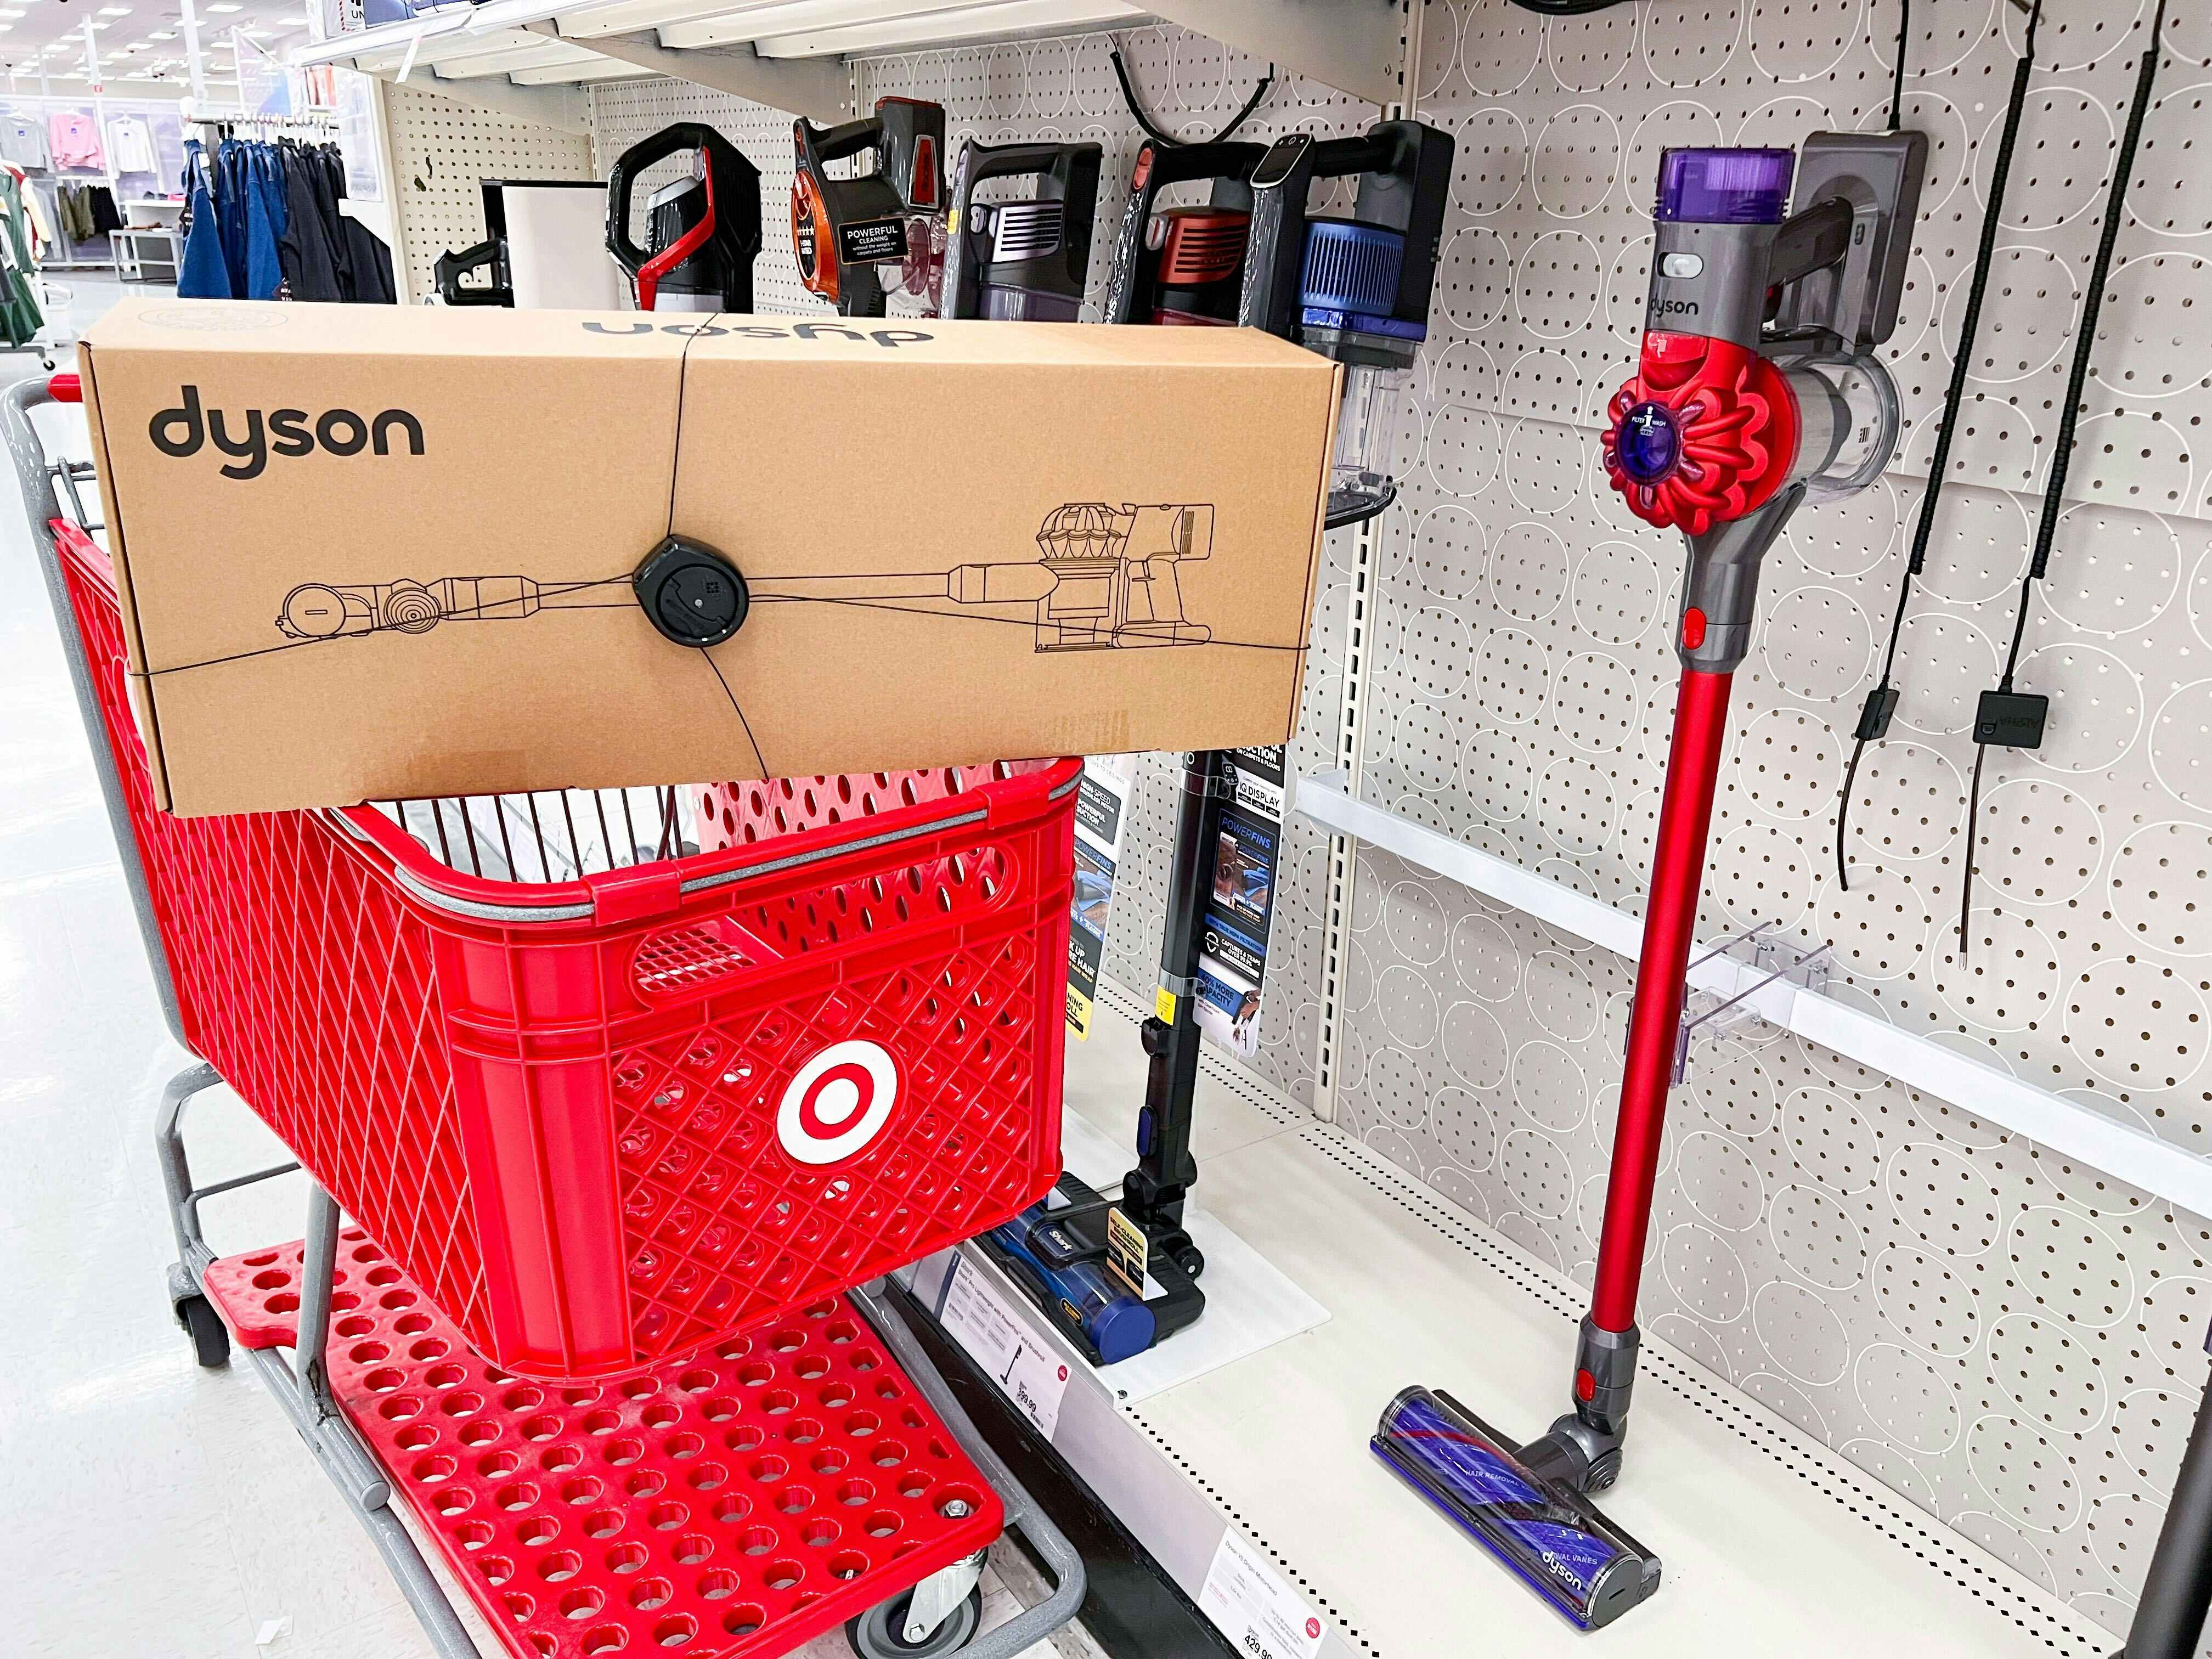 A Dyson vacuum in a Target shopping cart parked next to a display.